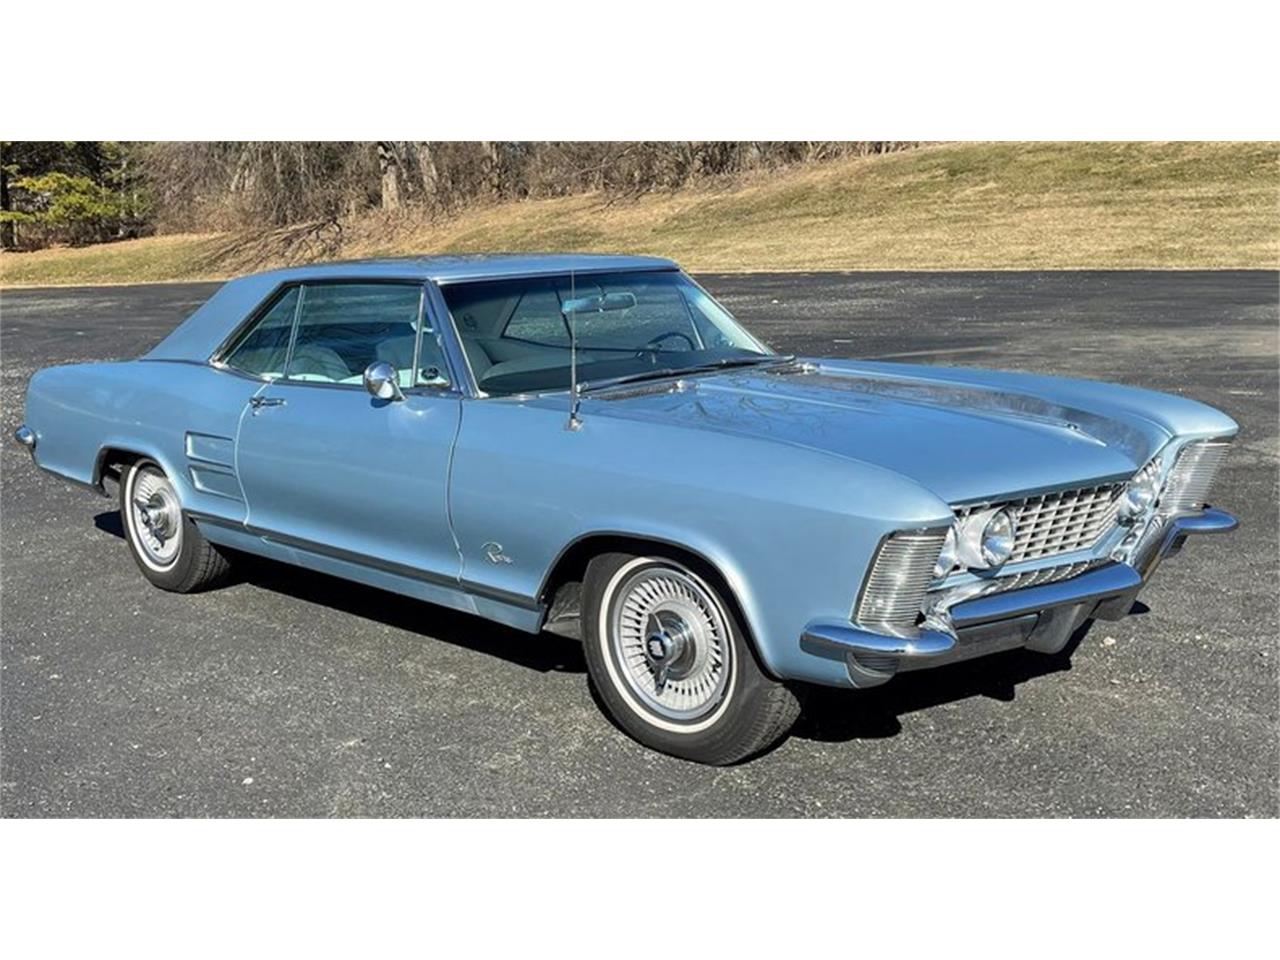 1963 Buick Riviera for sale in West Chester, PA